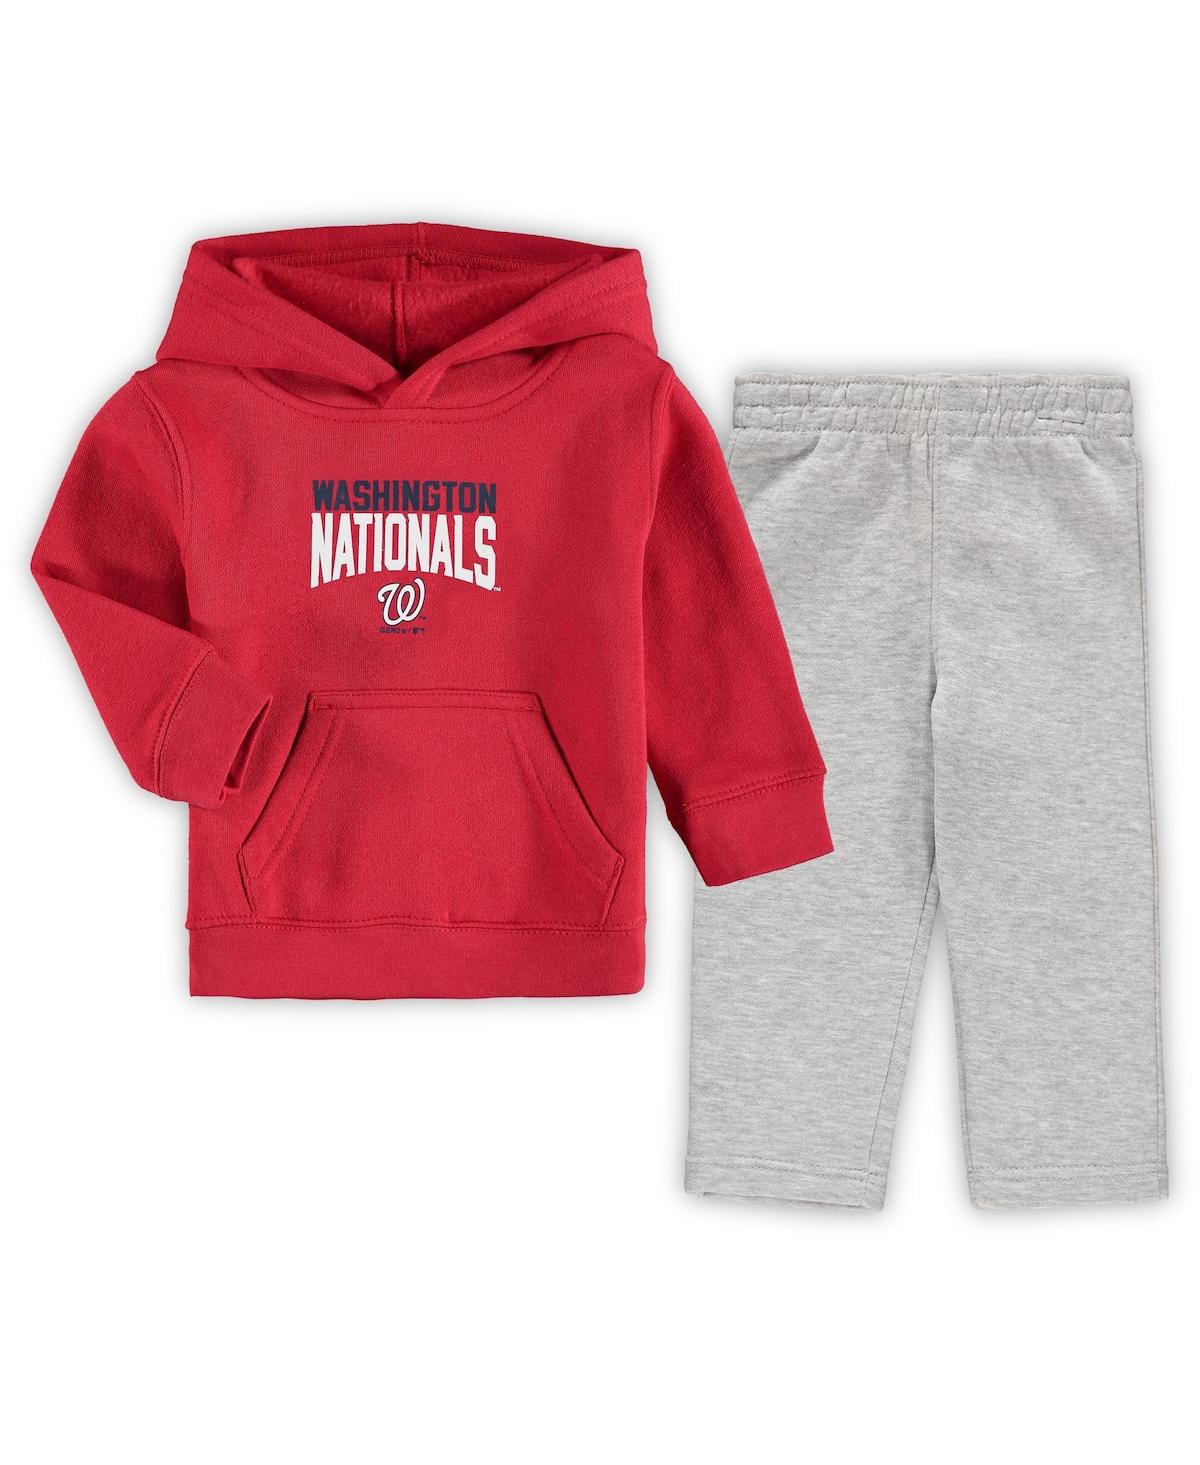 Outerstuff Babies' Toddler Boys Red, Heathered Gray Washington Nationals Fan Flare Fleece Hoodie And Pants Set In Red,heathered Gray